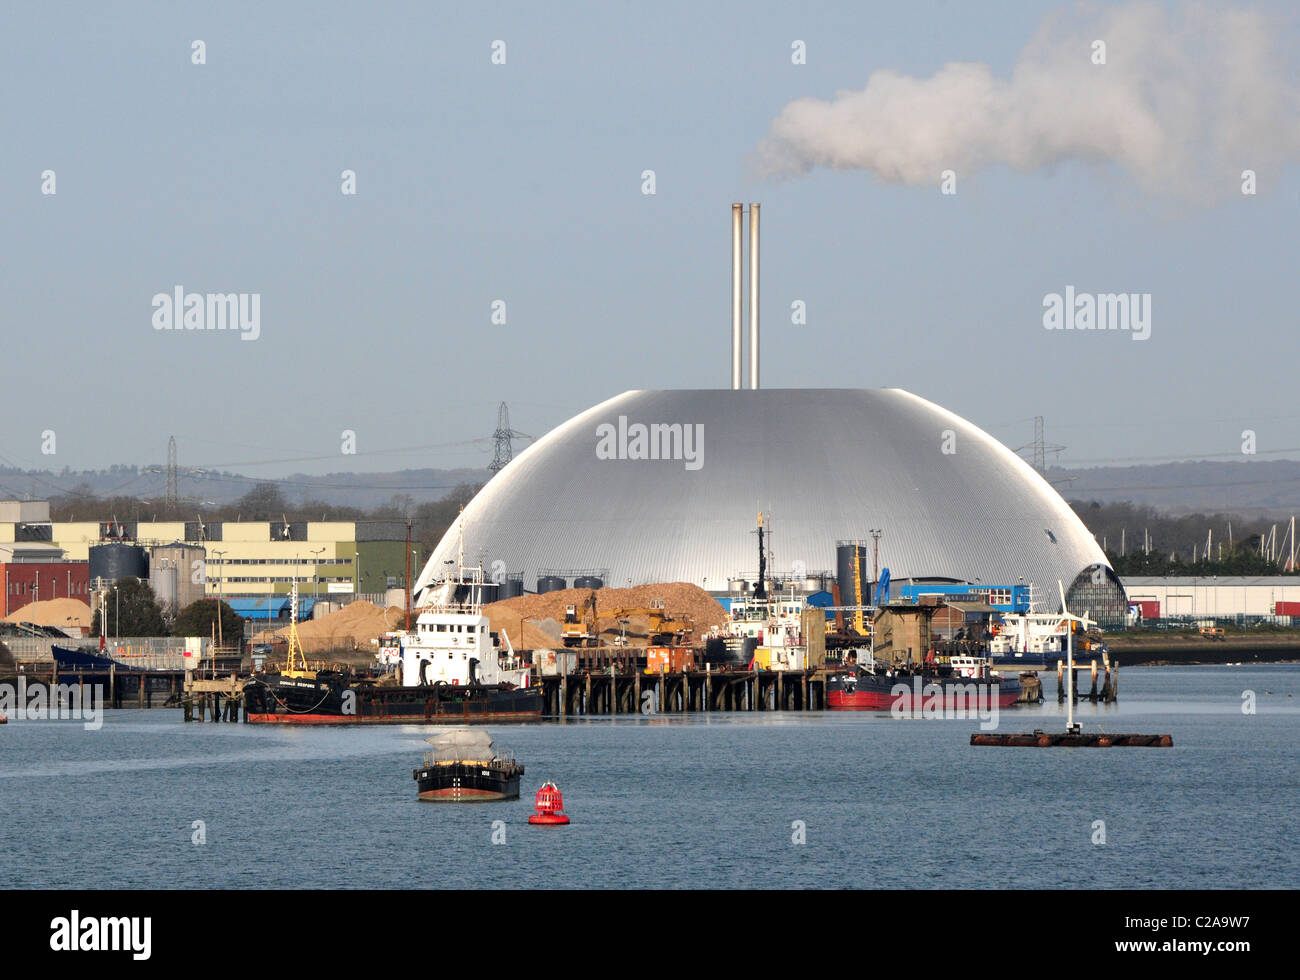 A modern gas fired power station with unusual dome shaped structure. Stock Photo